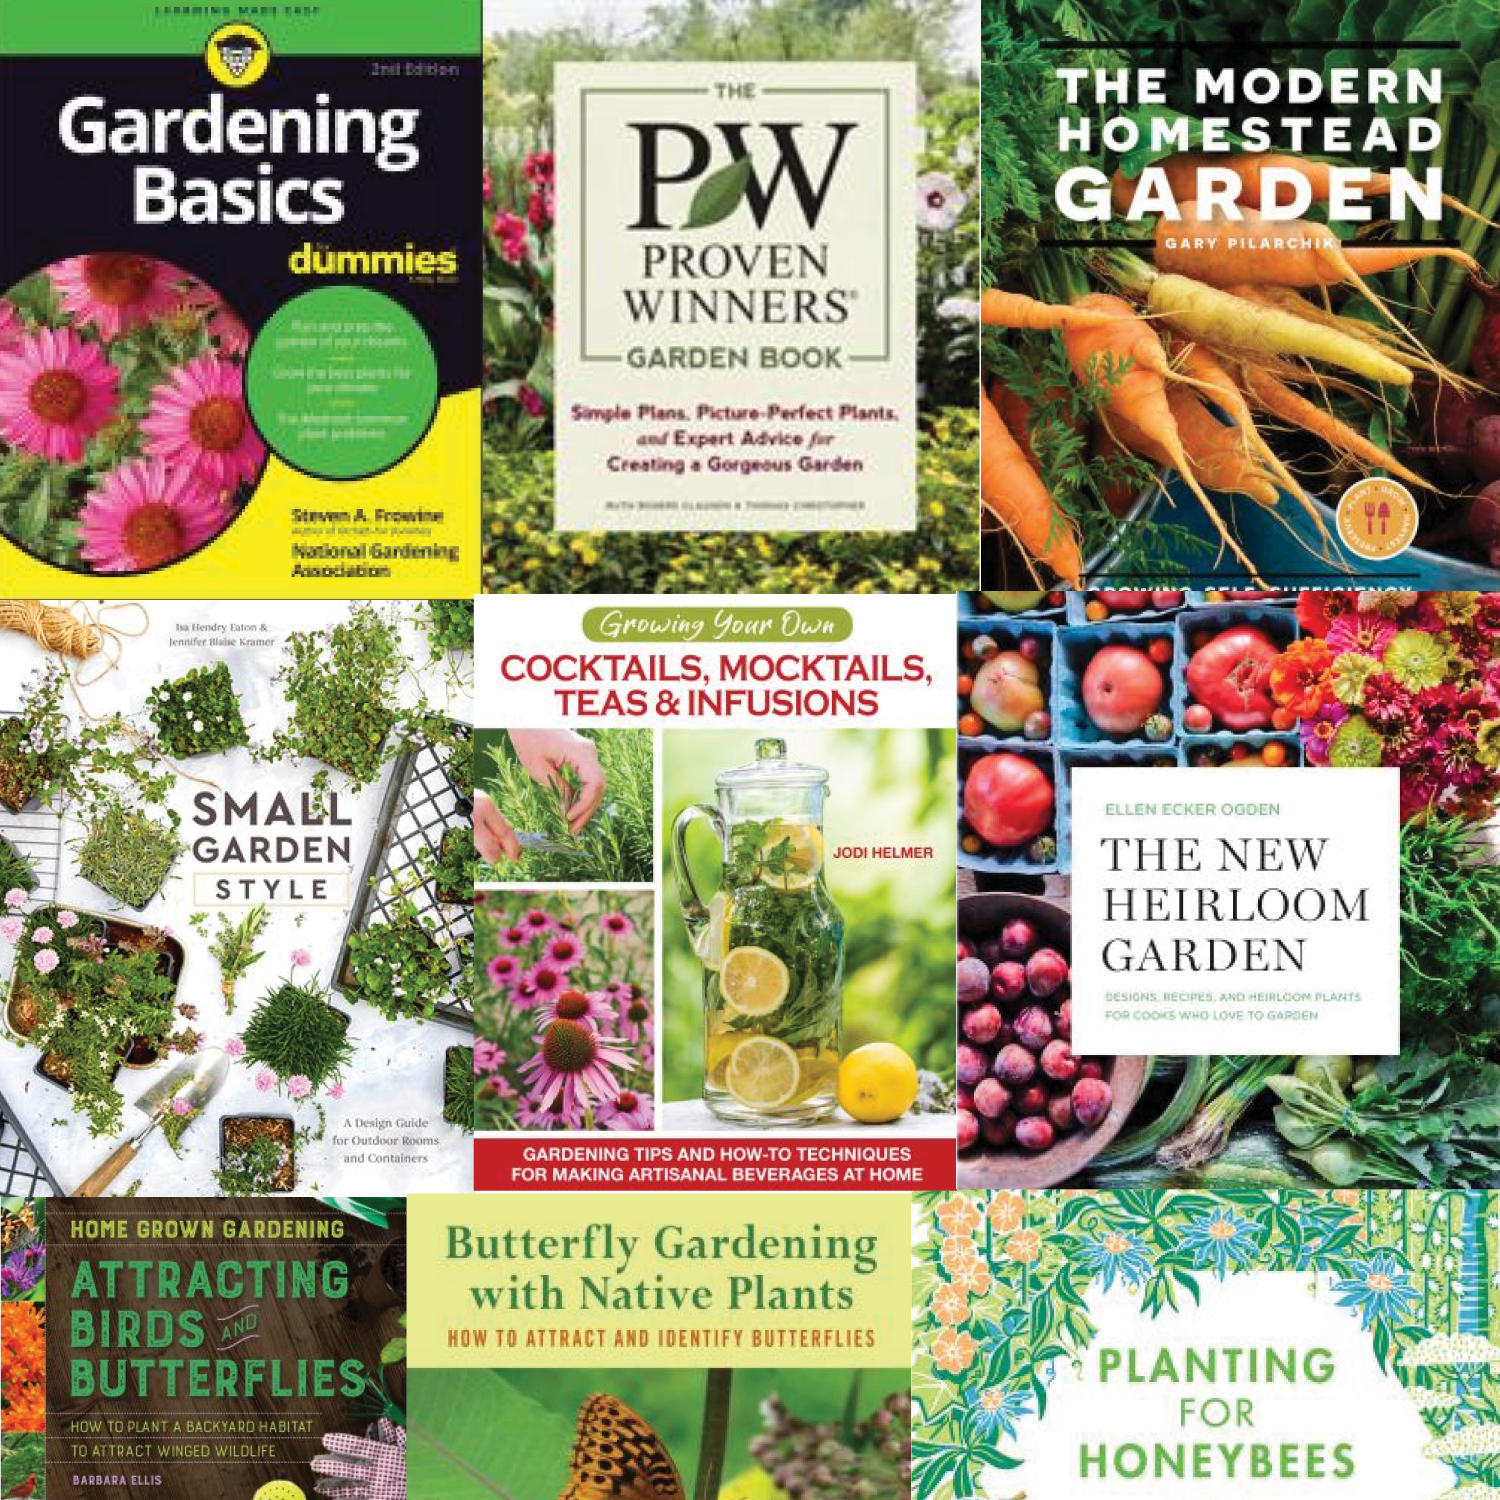 Planning the perfect garden